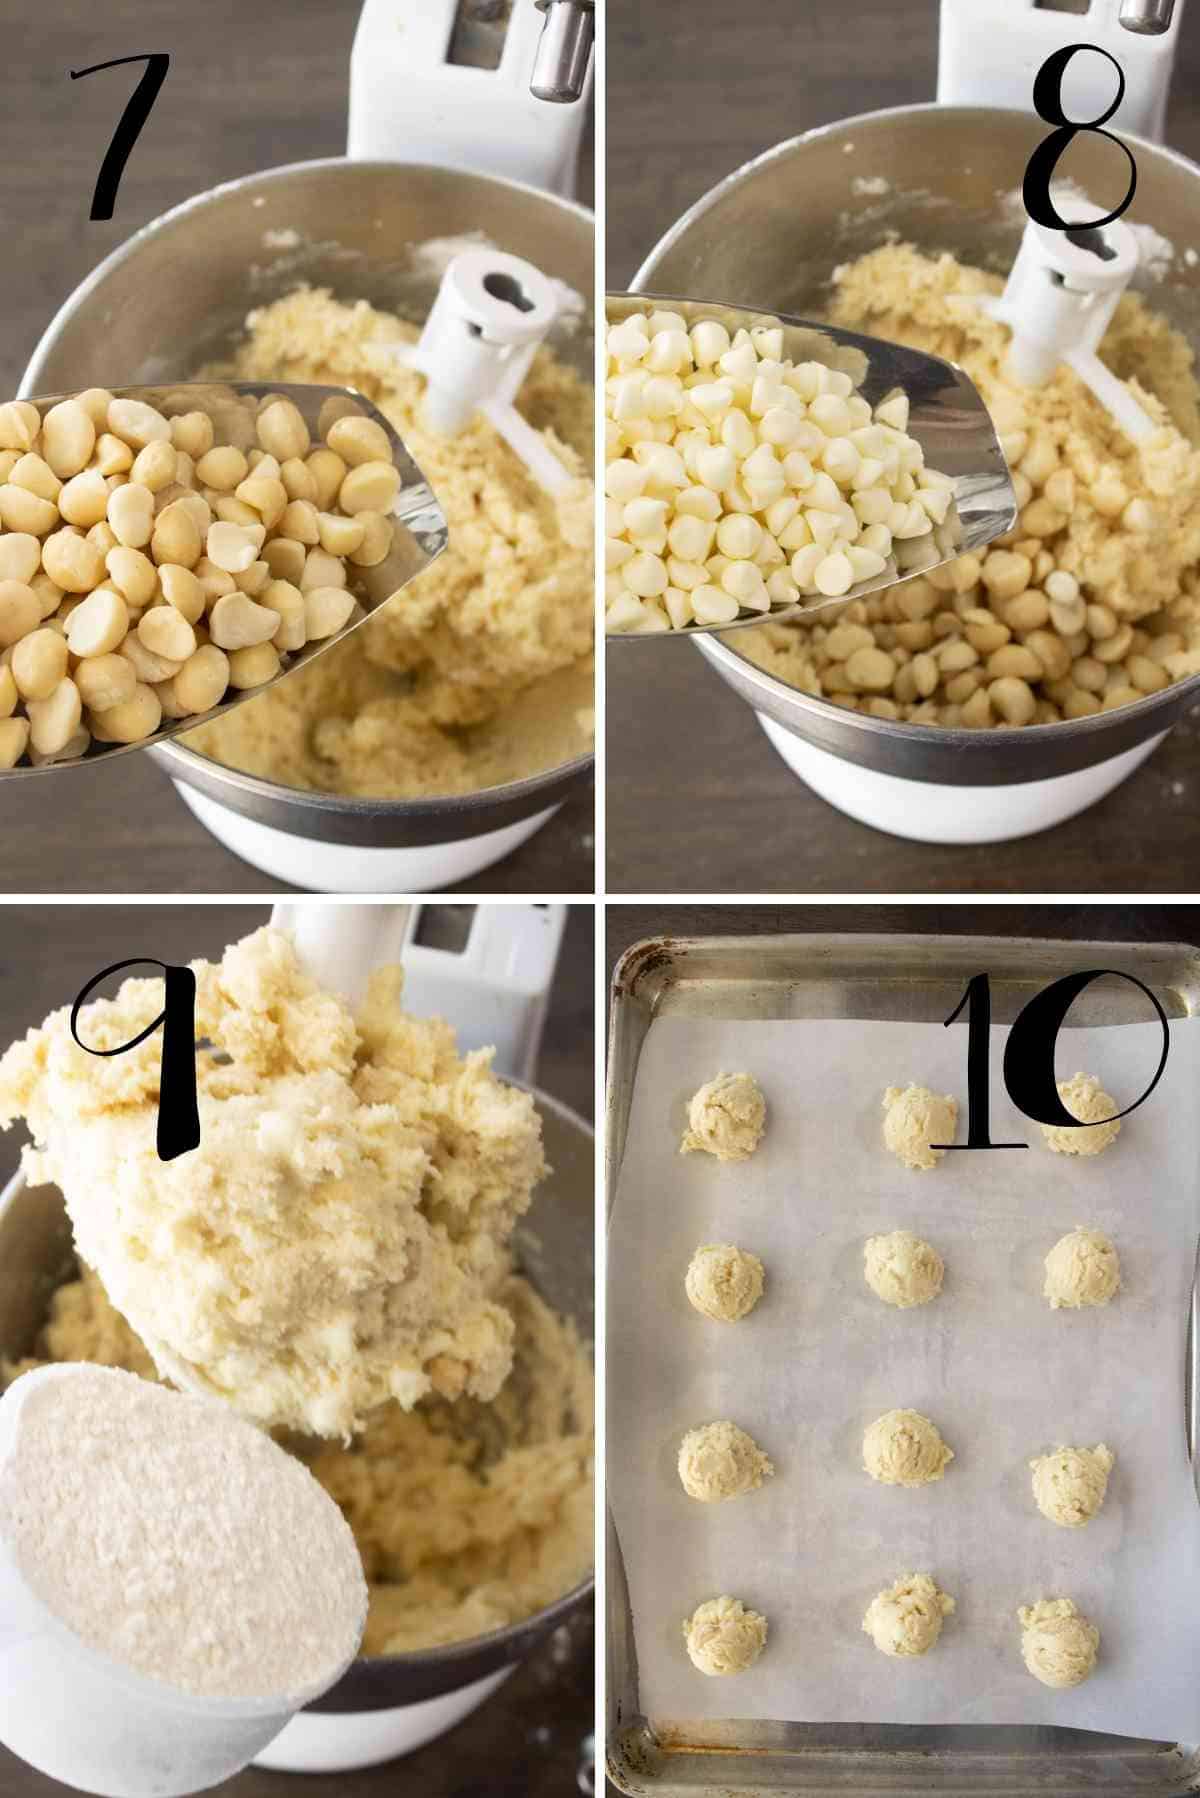 Add the macadamia nuts, and creamy white chocolate chips.  Mix, scoop and bake!